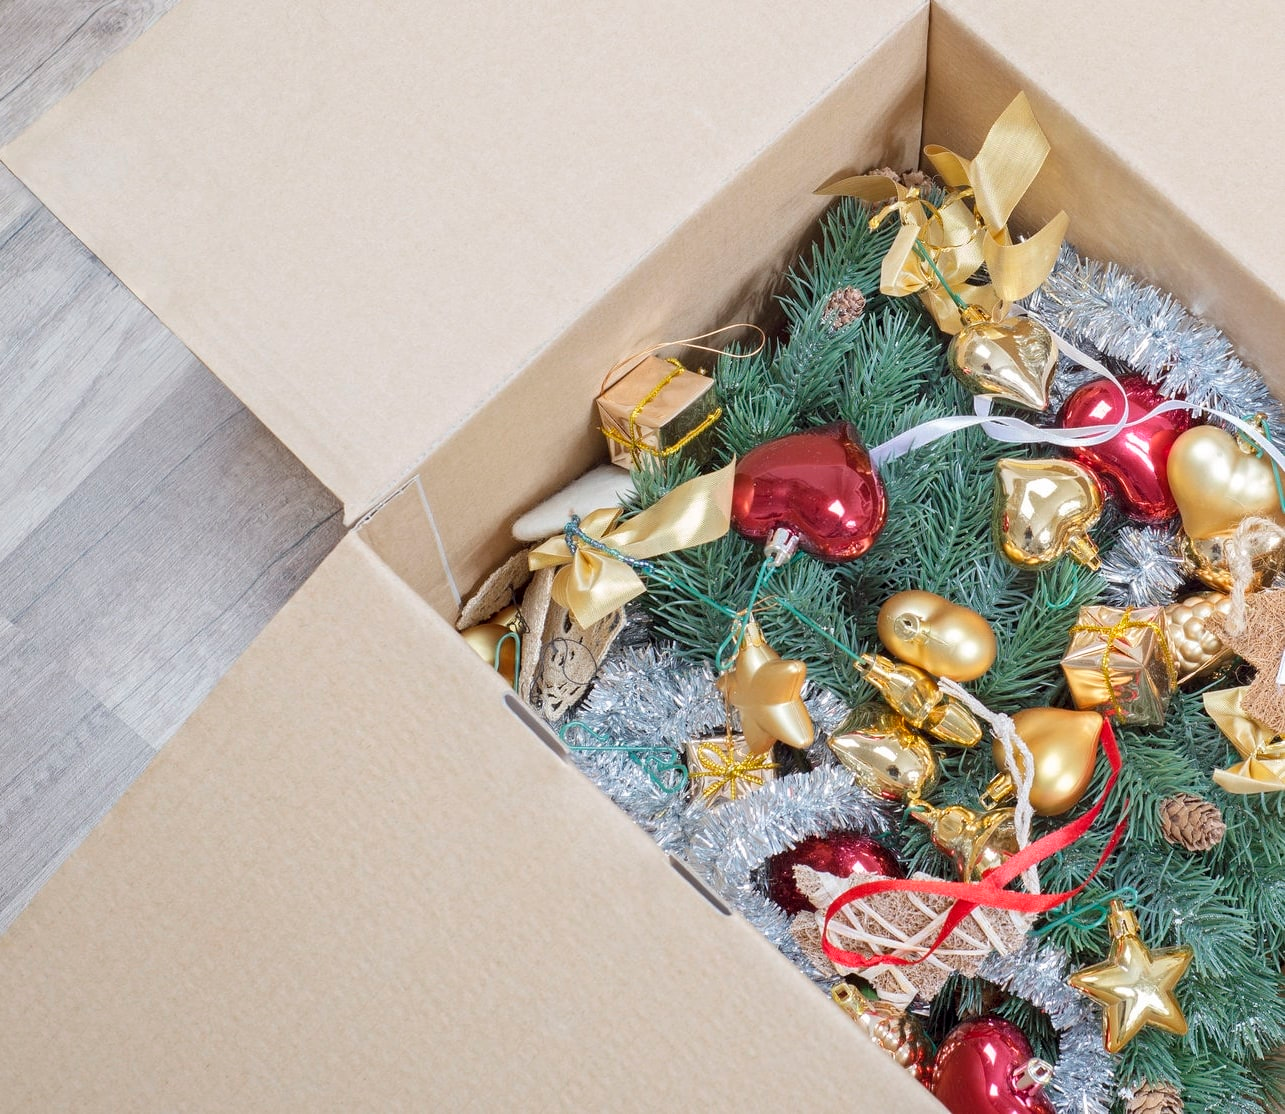 Open Box of Christmas Decorations